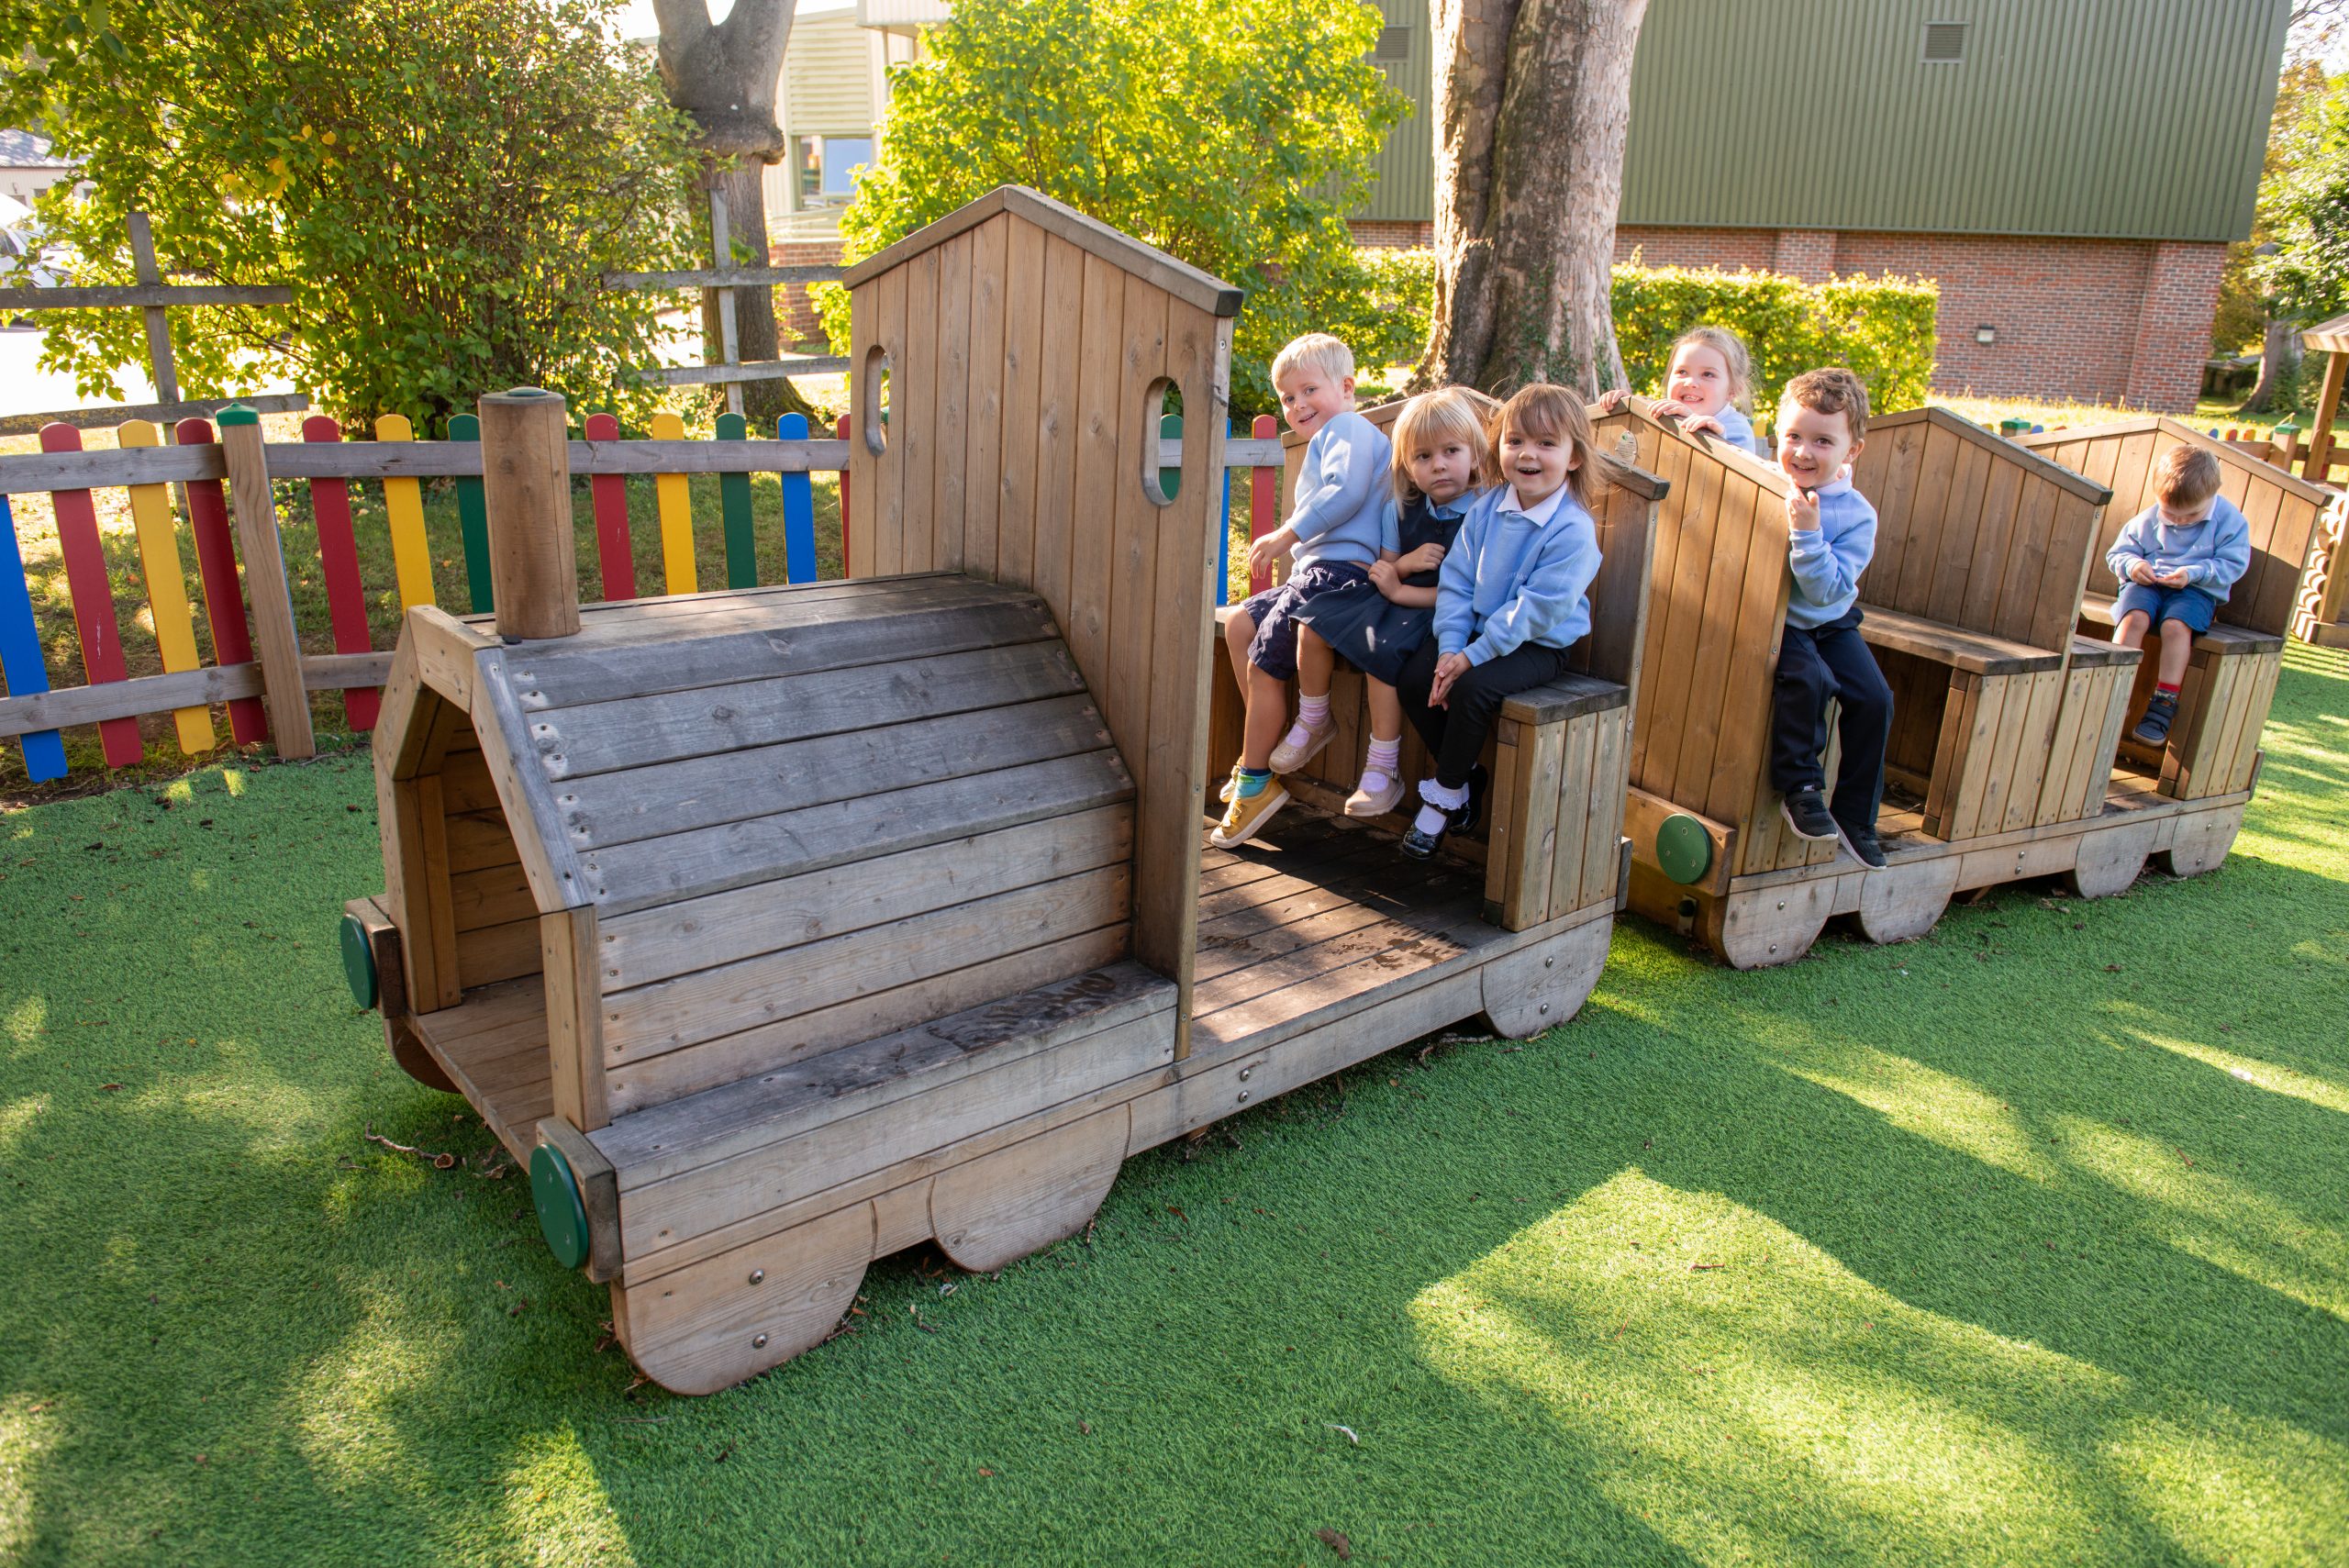 Rookwood nursery children playing on outdoor play equipment shaped like train.